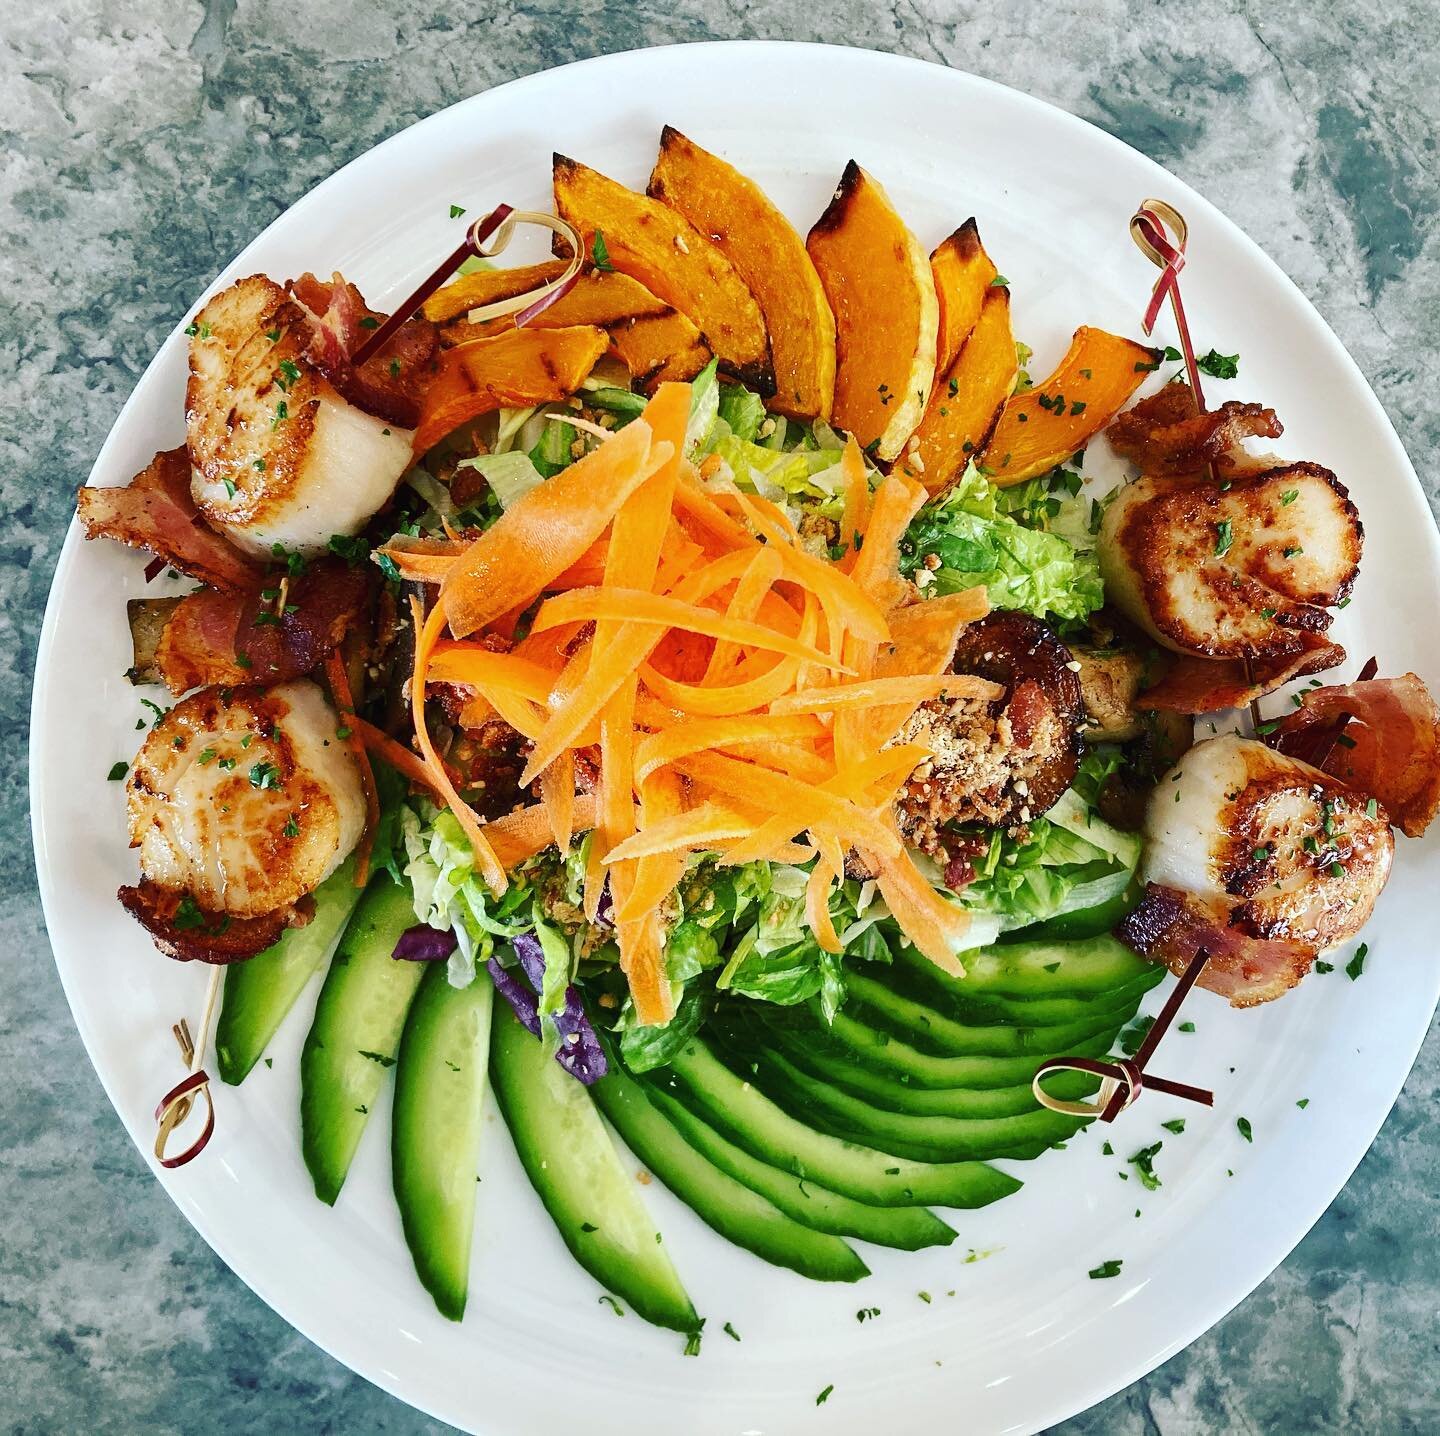 Hi 👋everyone,
#Butternut squash, cucumber, shaved salad 🥗 with
Tasty bacon Seared Scallops 🤤
And a champagne 🥂 vinaigrette 🙌🏻

I declare this national Salad Day 😋😝☀️